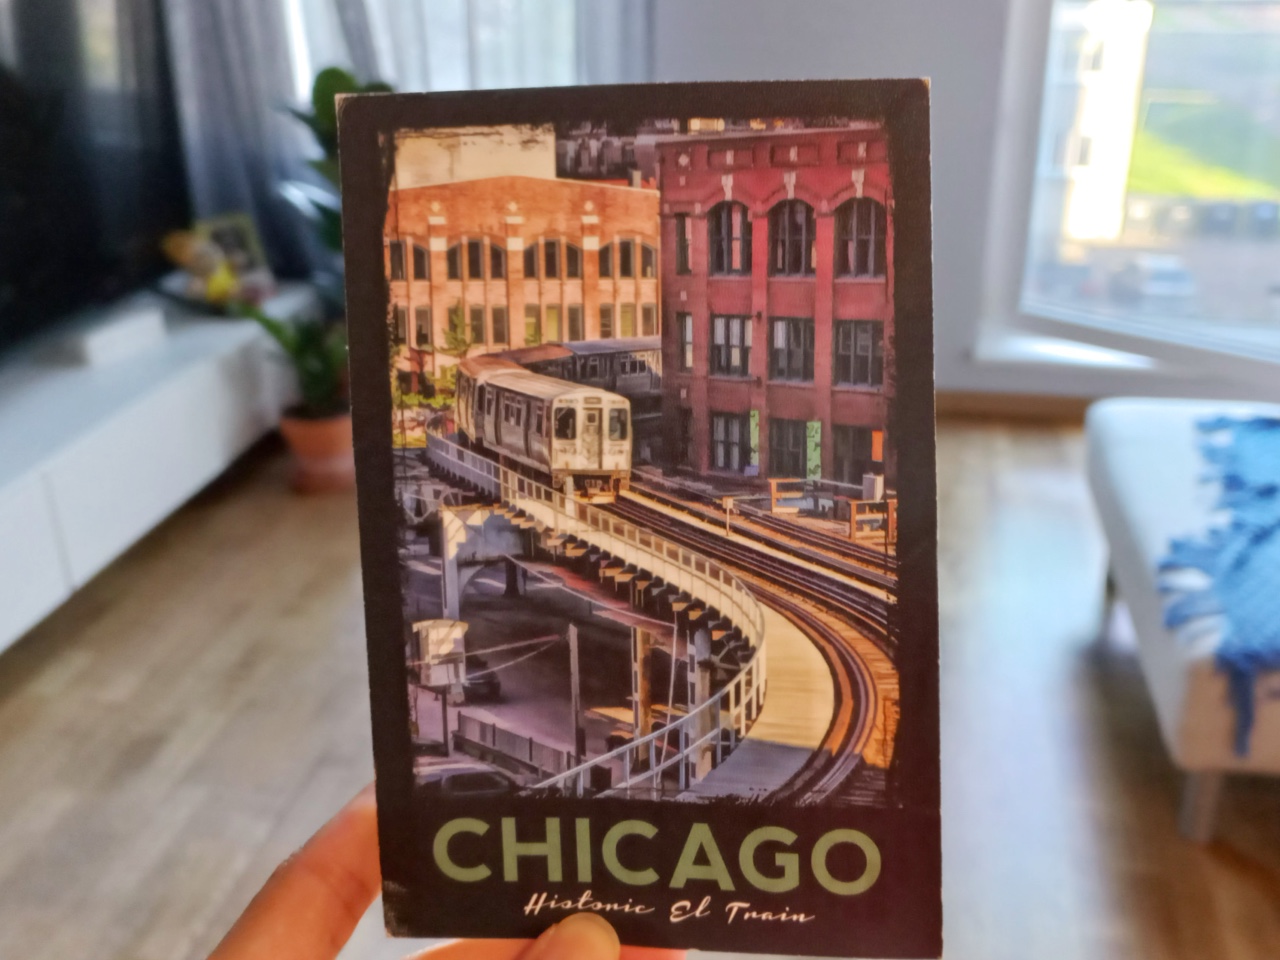 A postcard from Chicago, United States